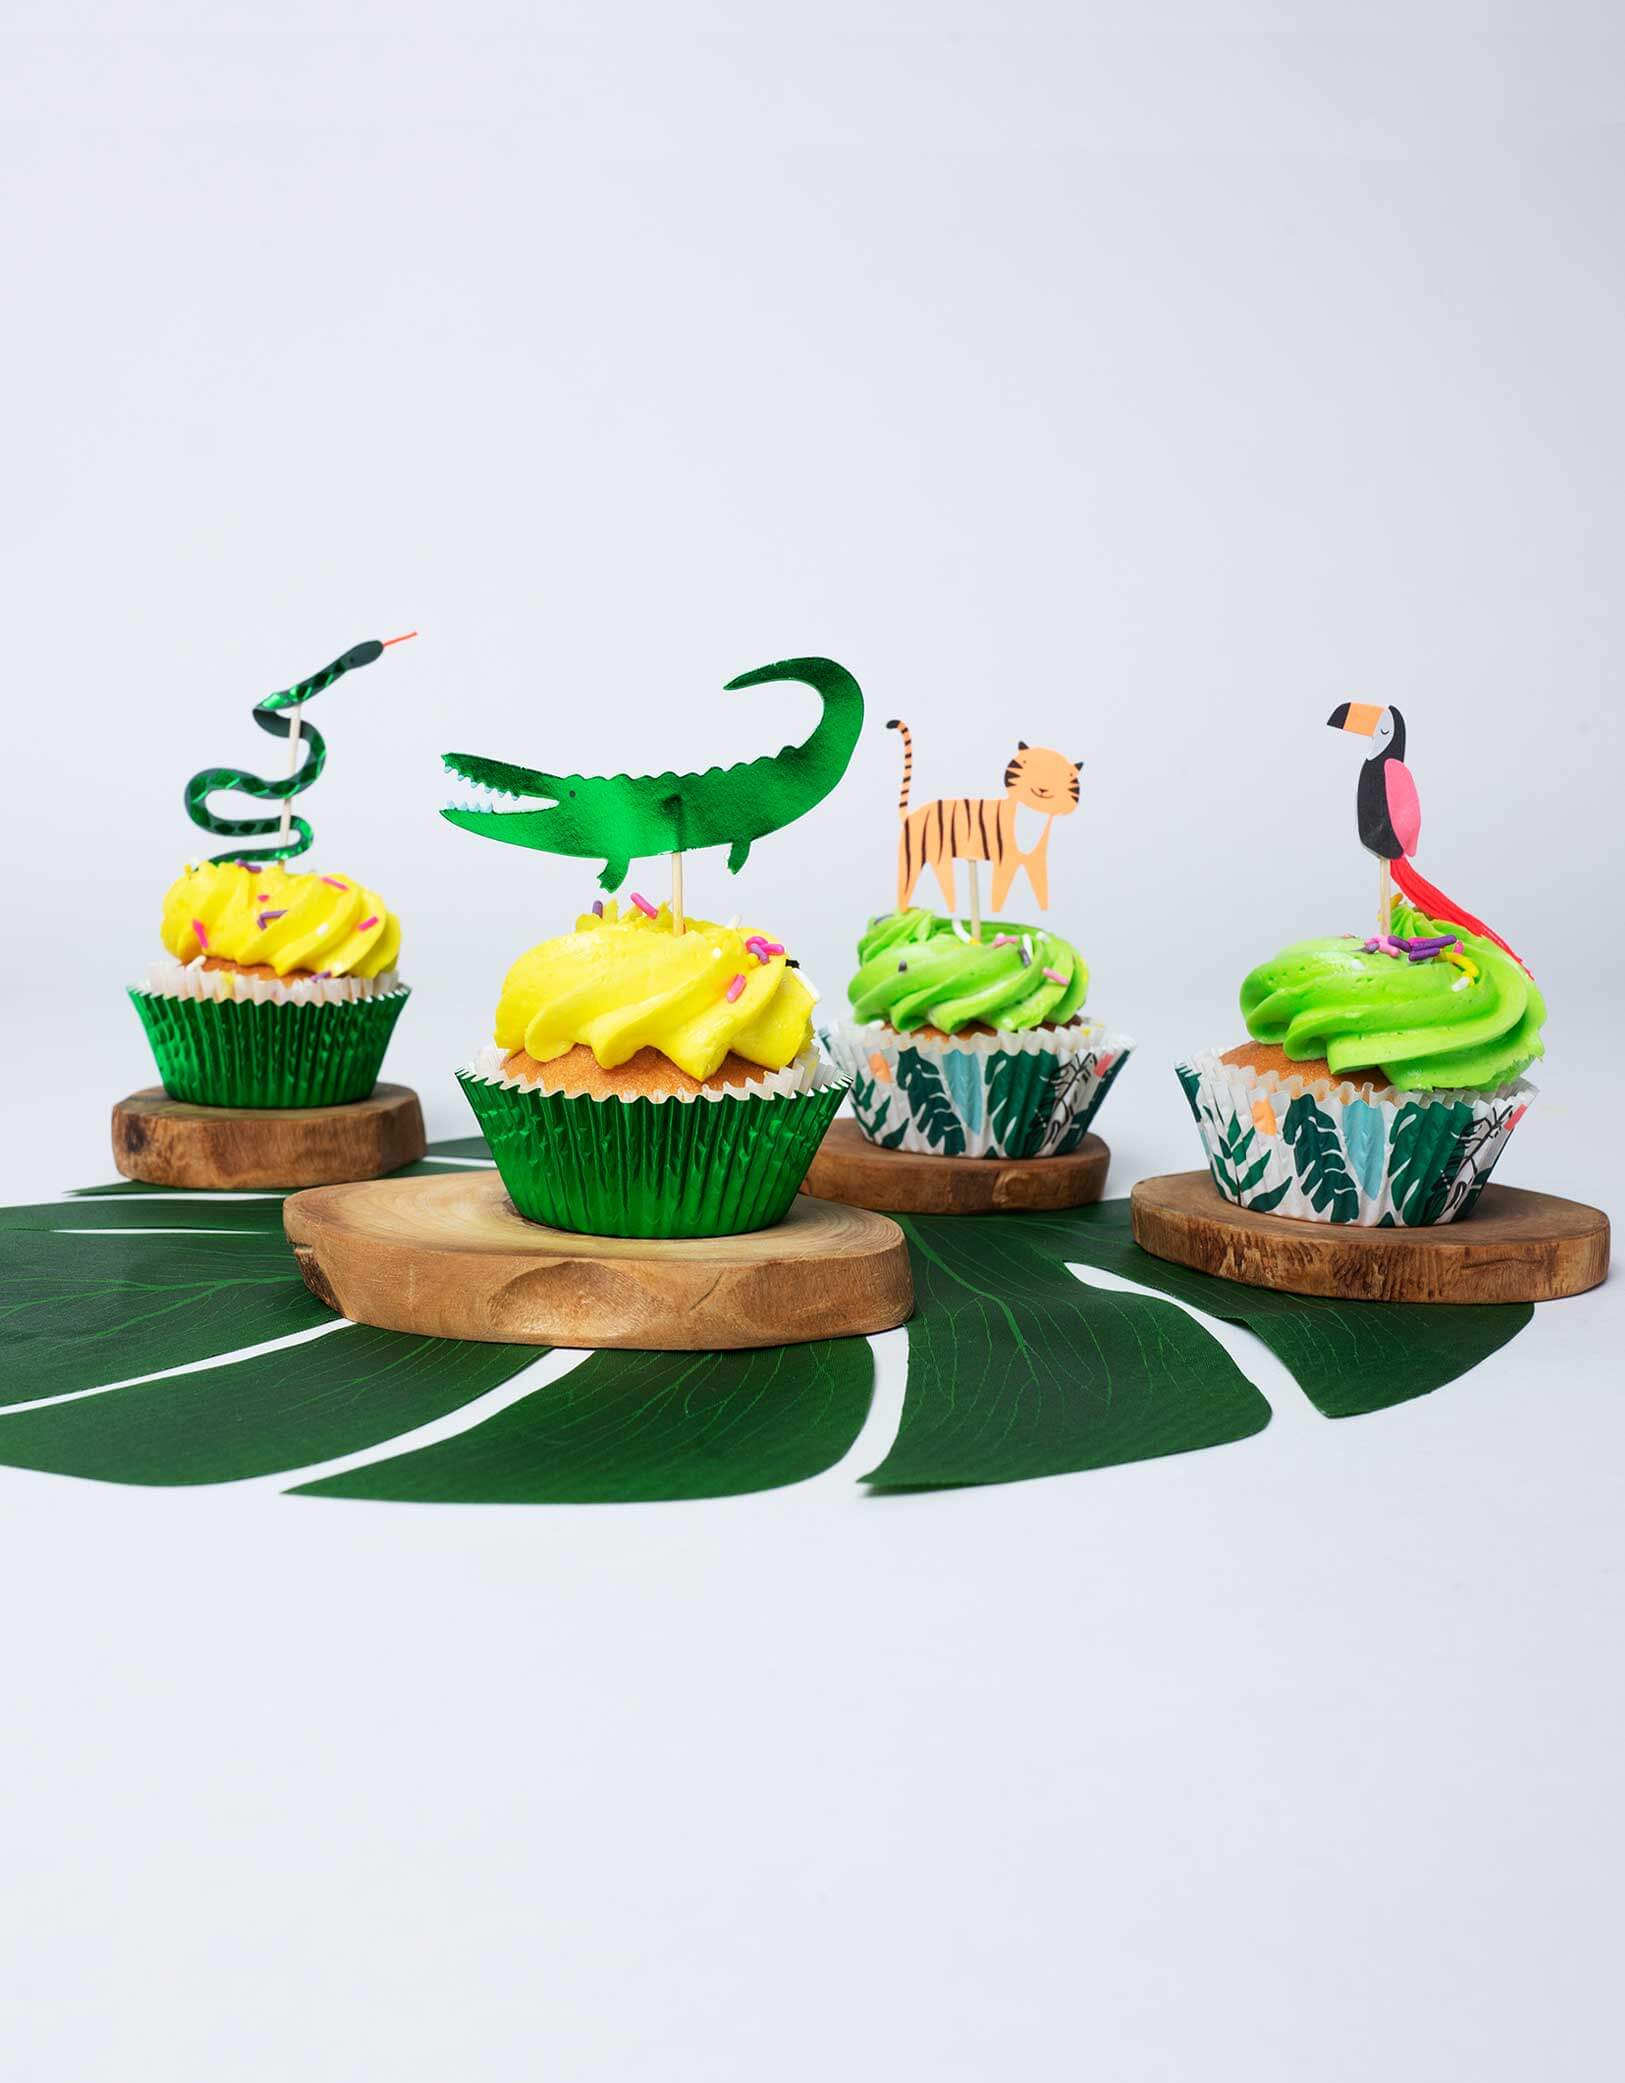 snakes, tigers, crocodiles and toucans toppers on cupcakes